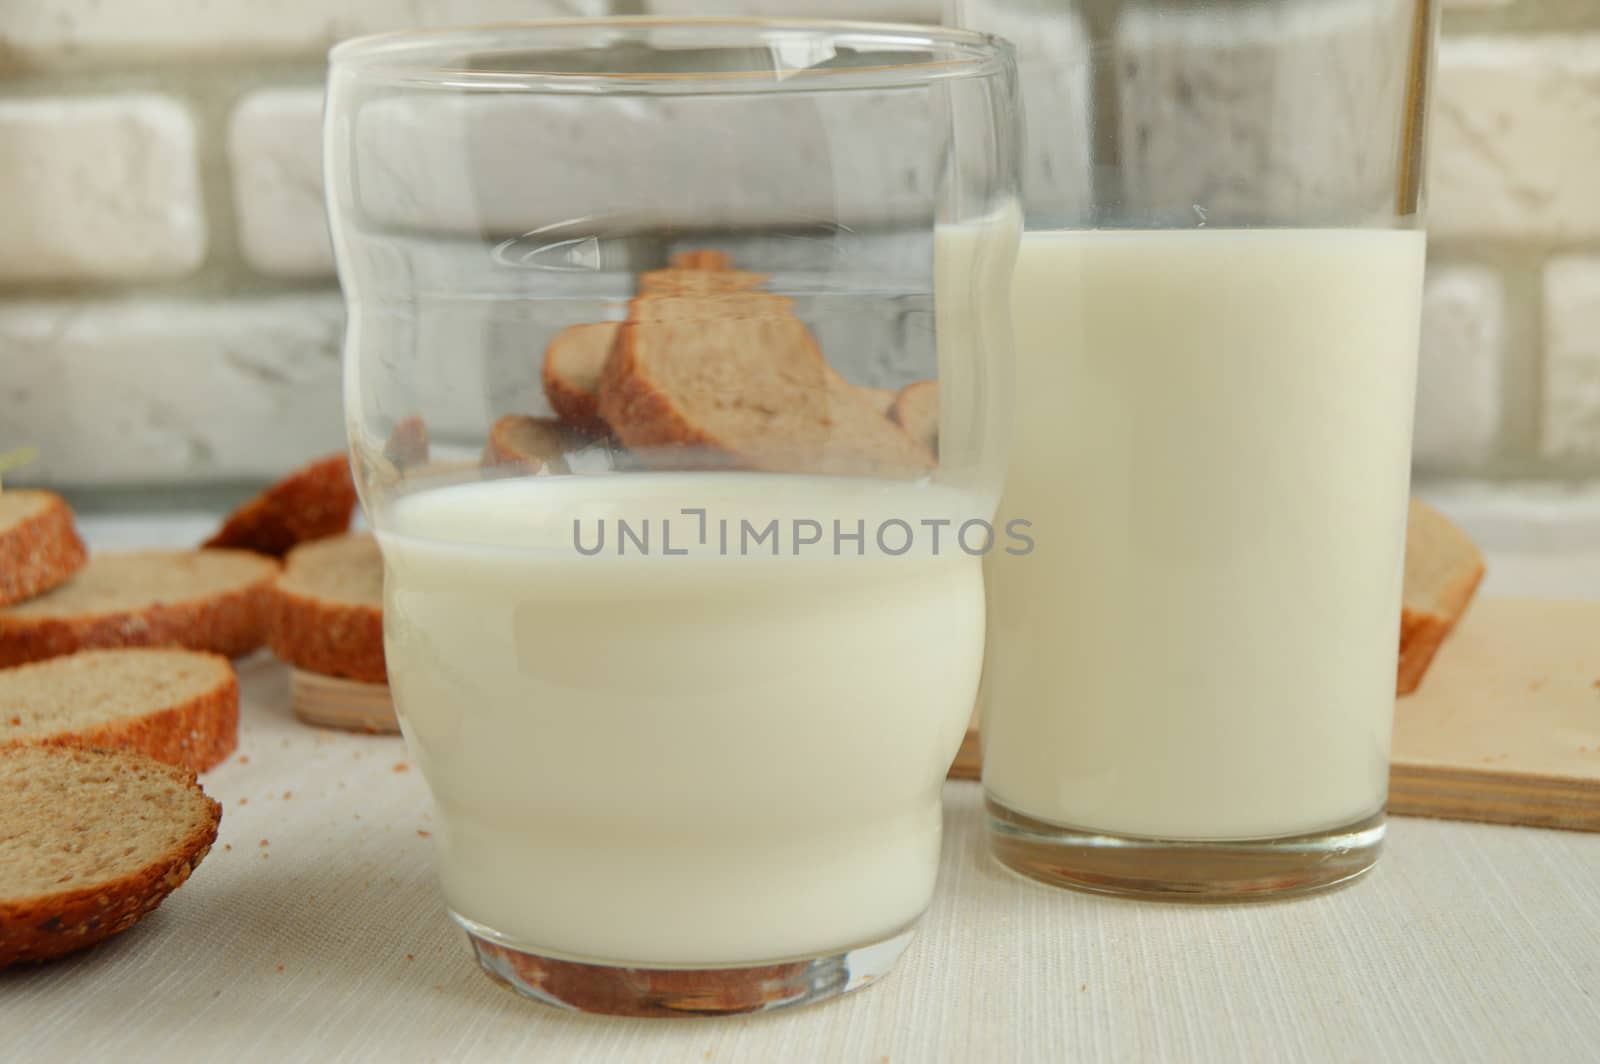 Two glasses of milk are on the table, Breakfast for the family, healthy eating concept, world health day.